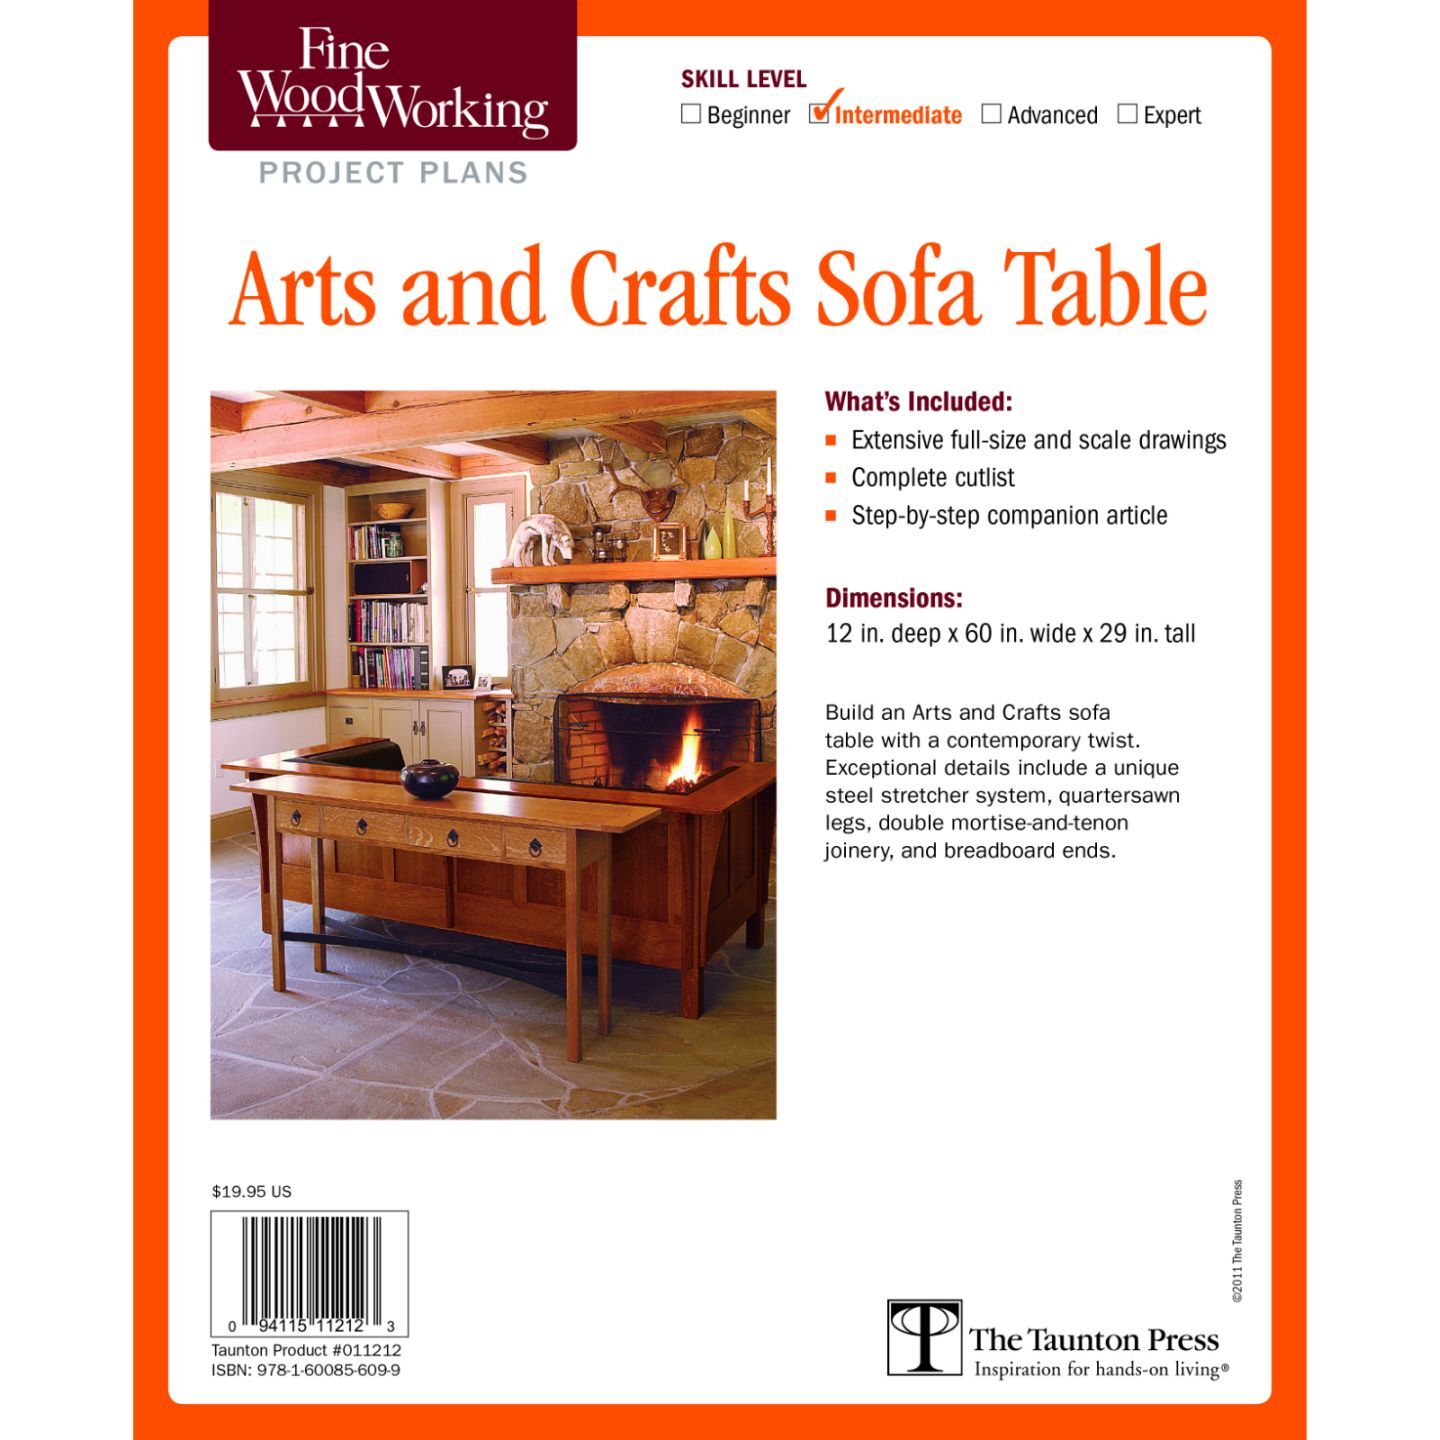 Arts and Crafts Sofa Table Plan